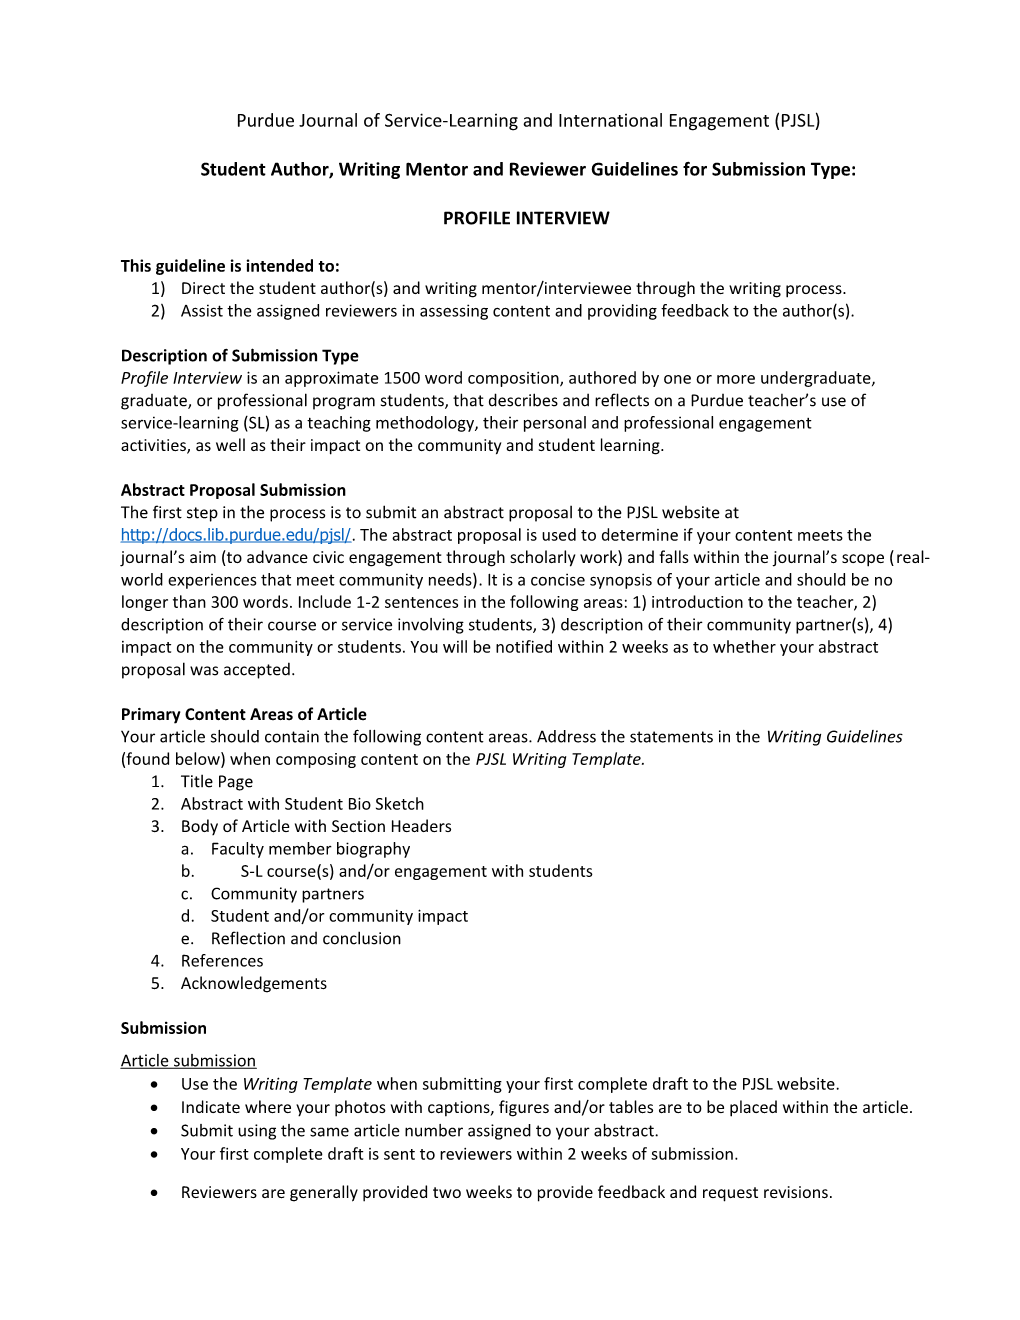 Student Author, Writing Mentor and Reviewer Guidelines for Submission Type